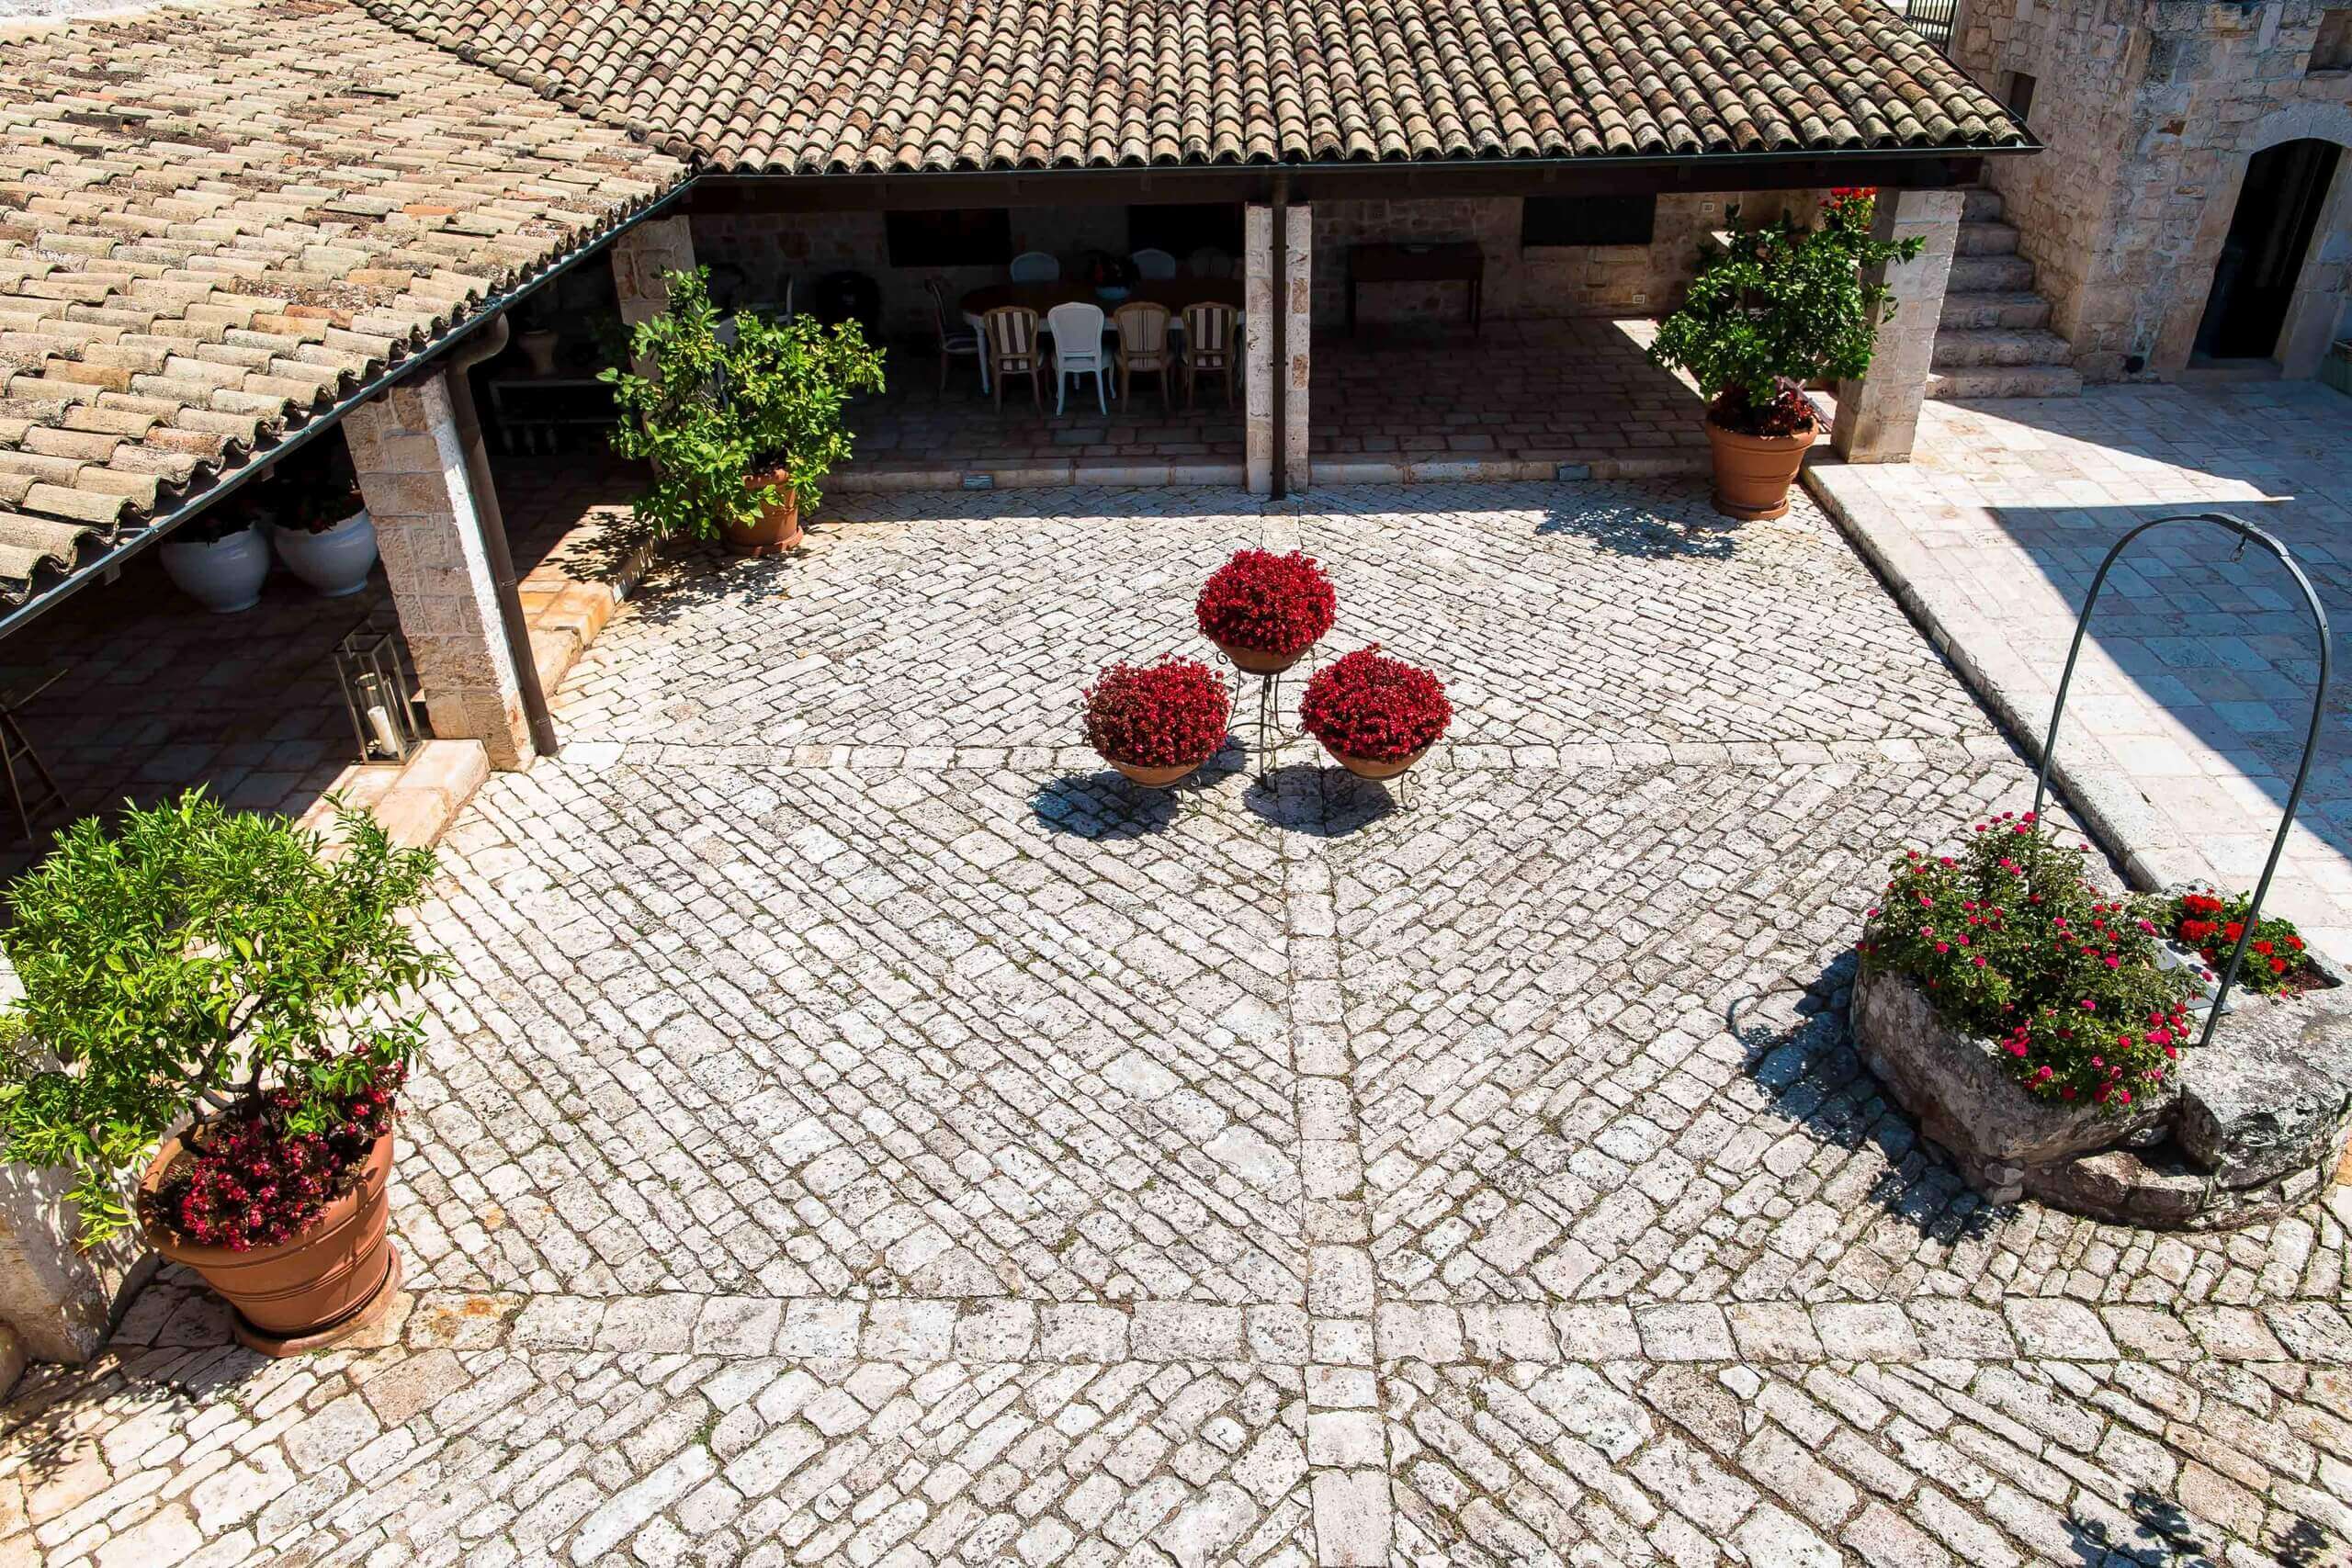 Courtyard equipped with kitchen, barbecue and living area to enjoy the most precious moments of conviviality.